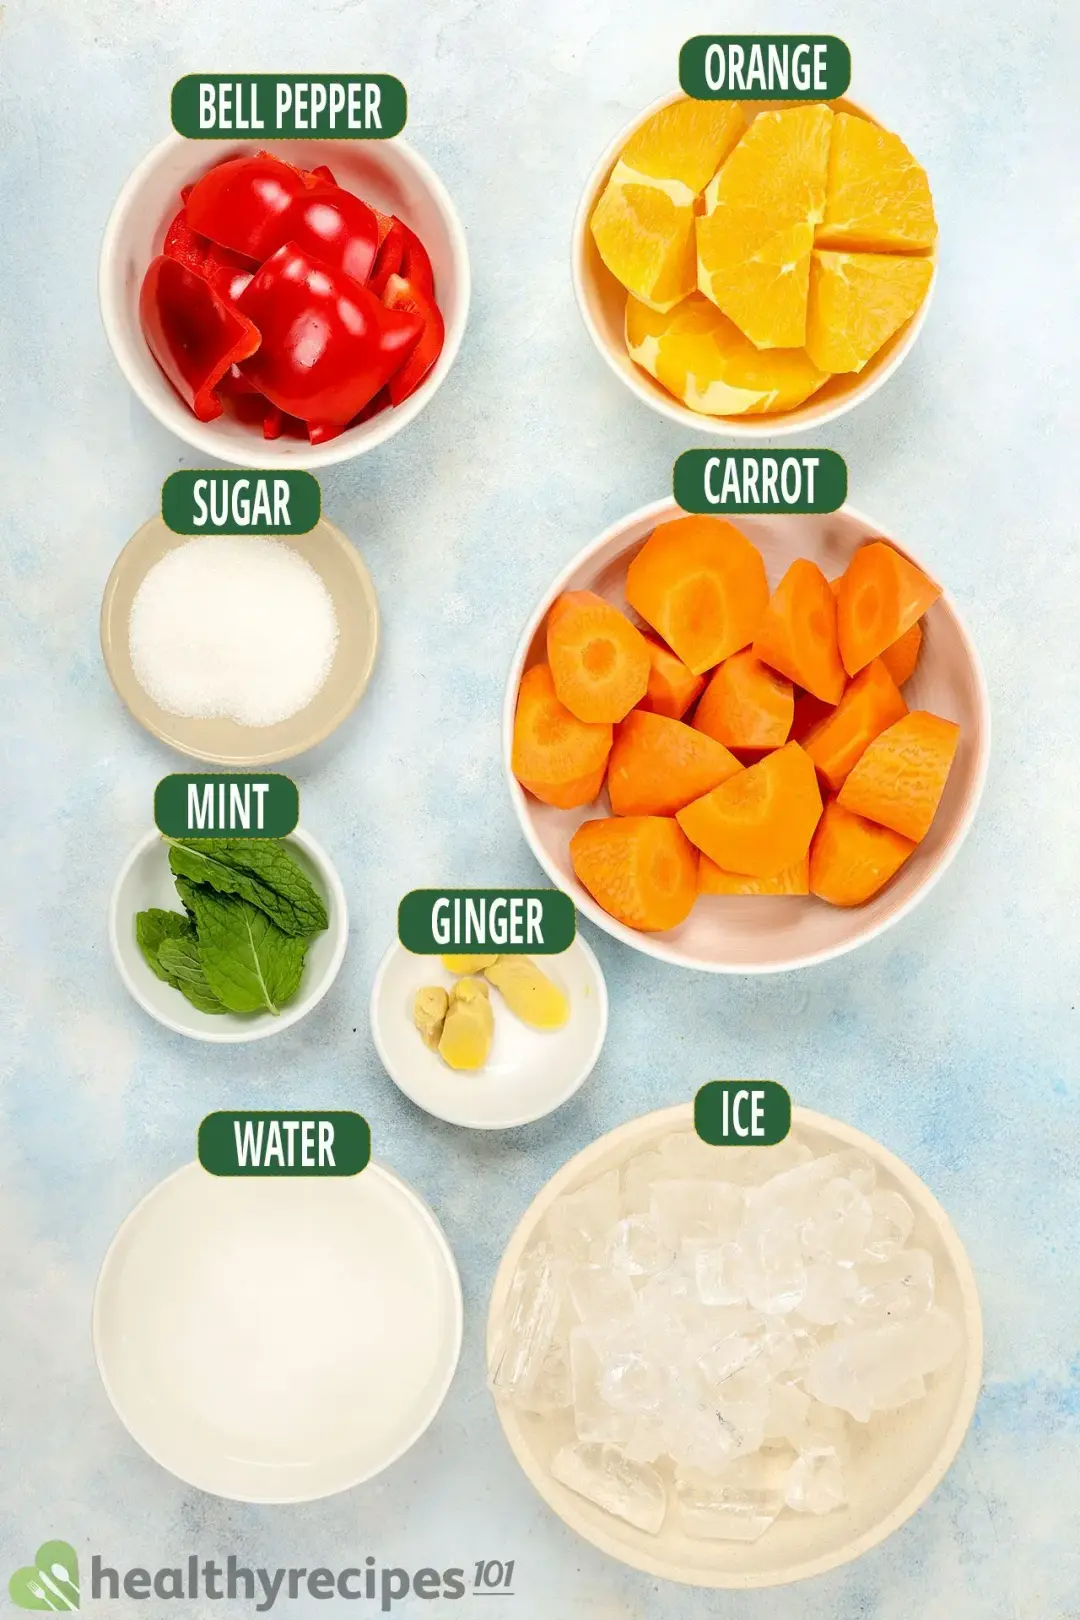 Ingredients in separate bowls: chunked red bell pepper, orange wedges, carrot chunks, sugar, mints, ice nuggets, water, and a ginger knob